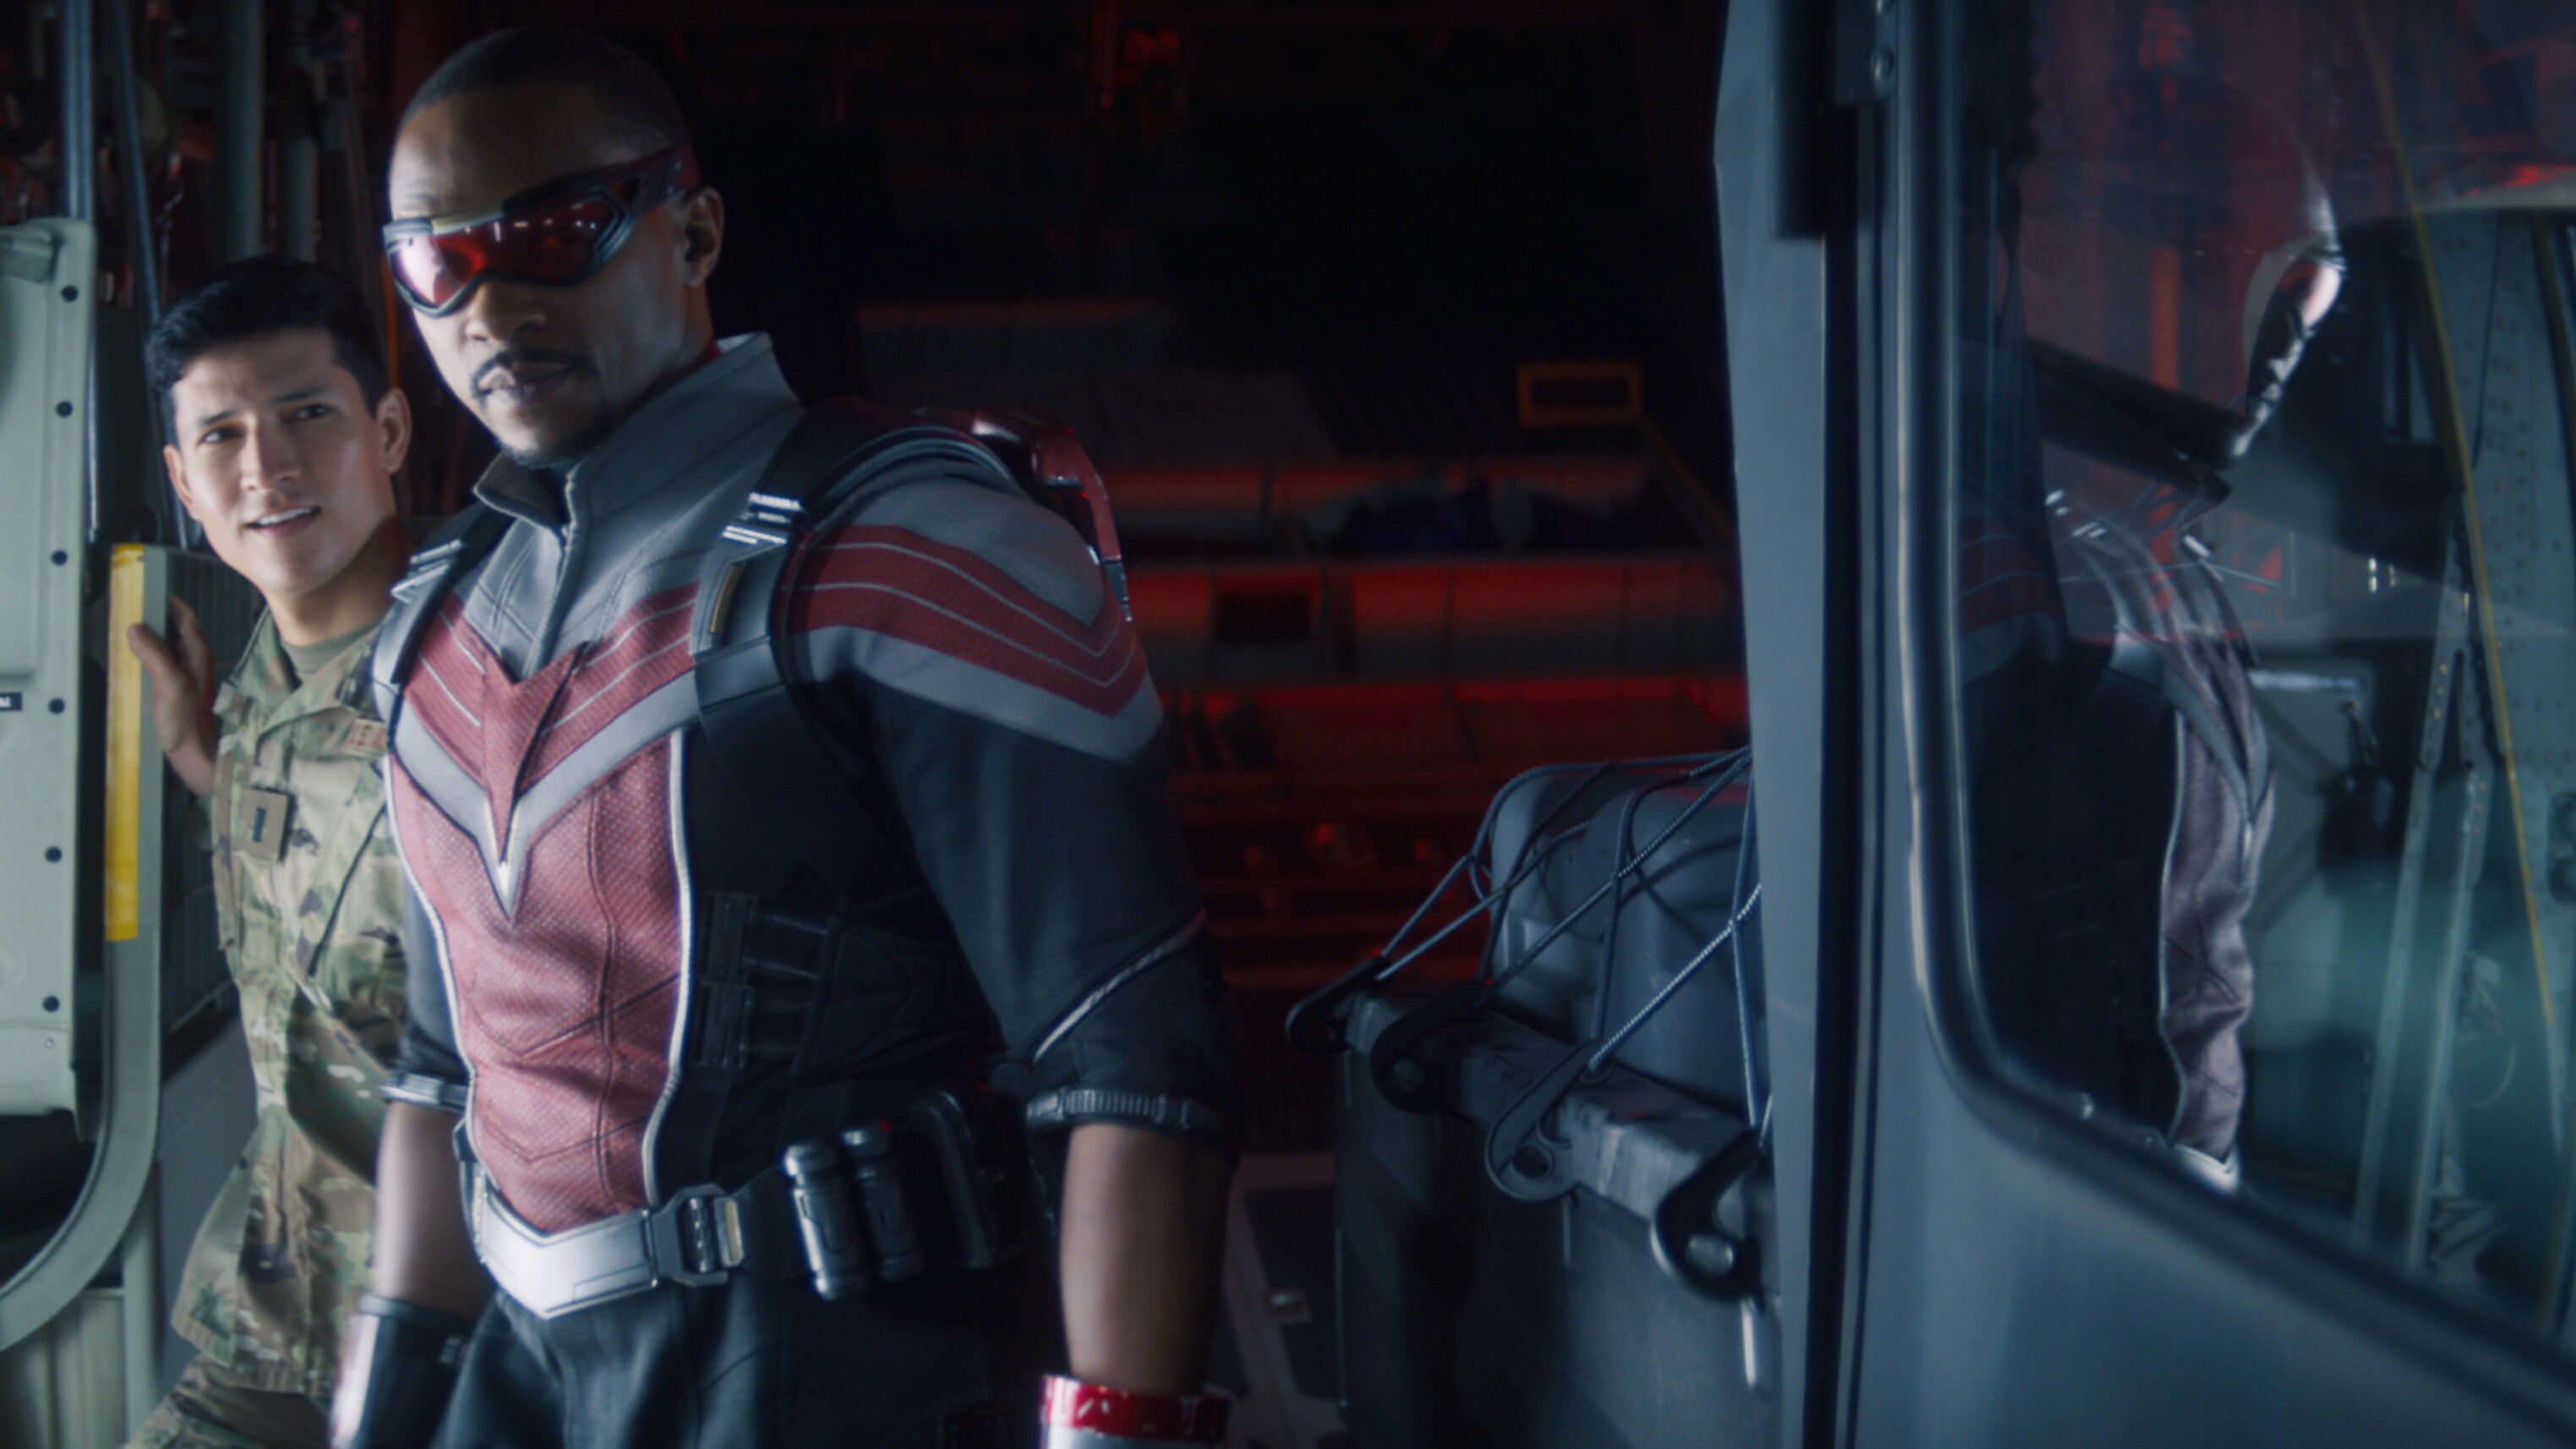 (Center): Falcon/Sam Wilson (Anthony Mackie) in Marvel Studios' THE FALCON AND THE WINTER SOLDIER exclusively on Disney+. Photo courtesy of Marvel Studios. ©Marvel Studios 2021. All Rights Reserved. 